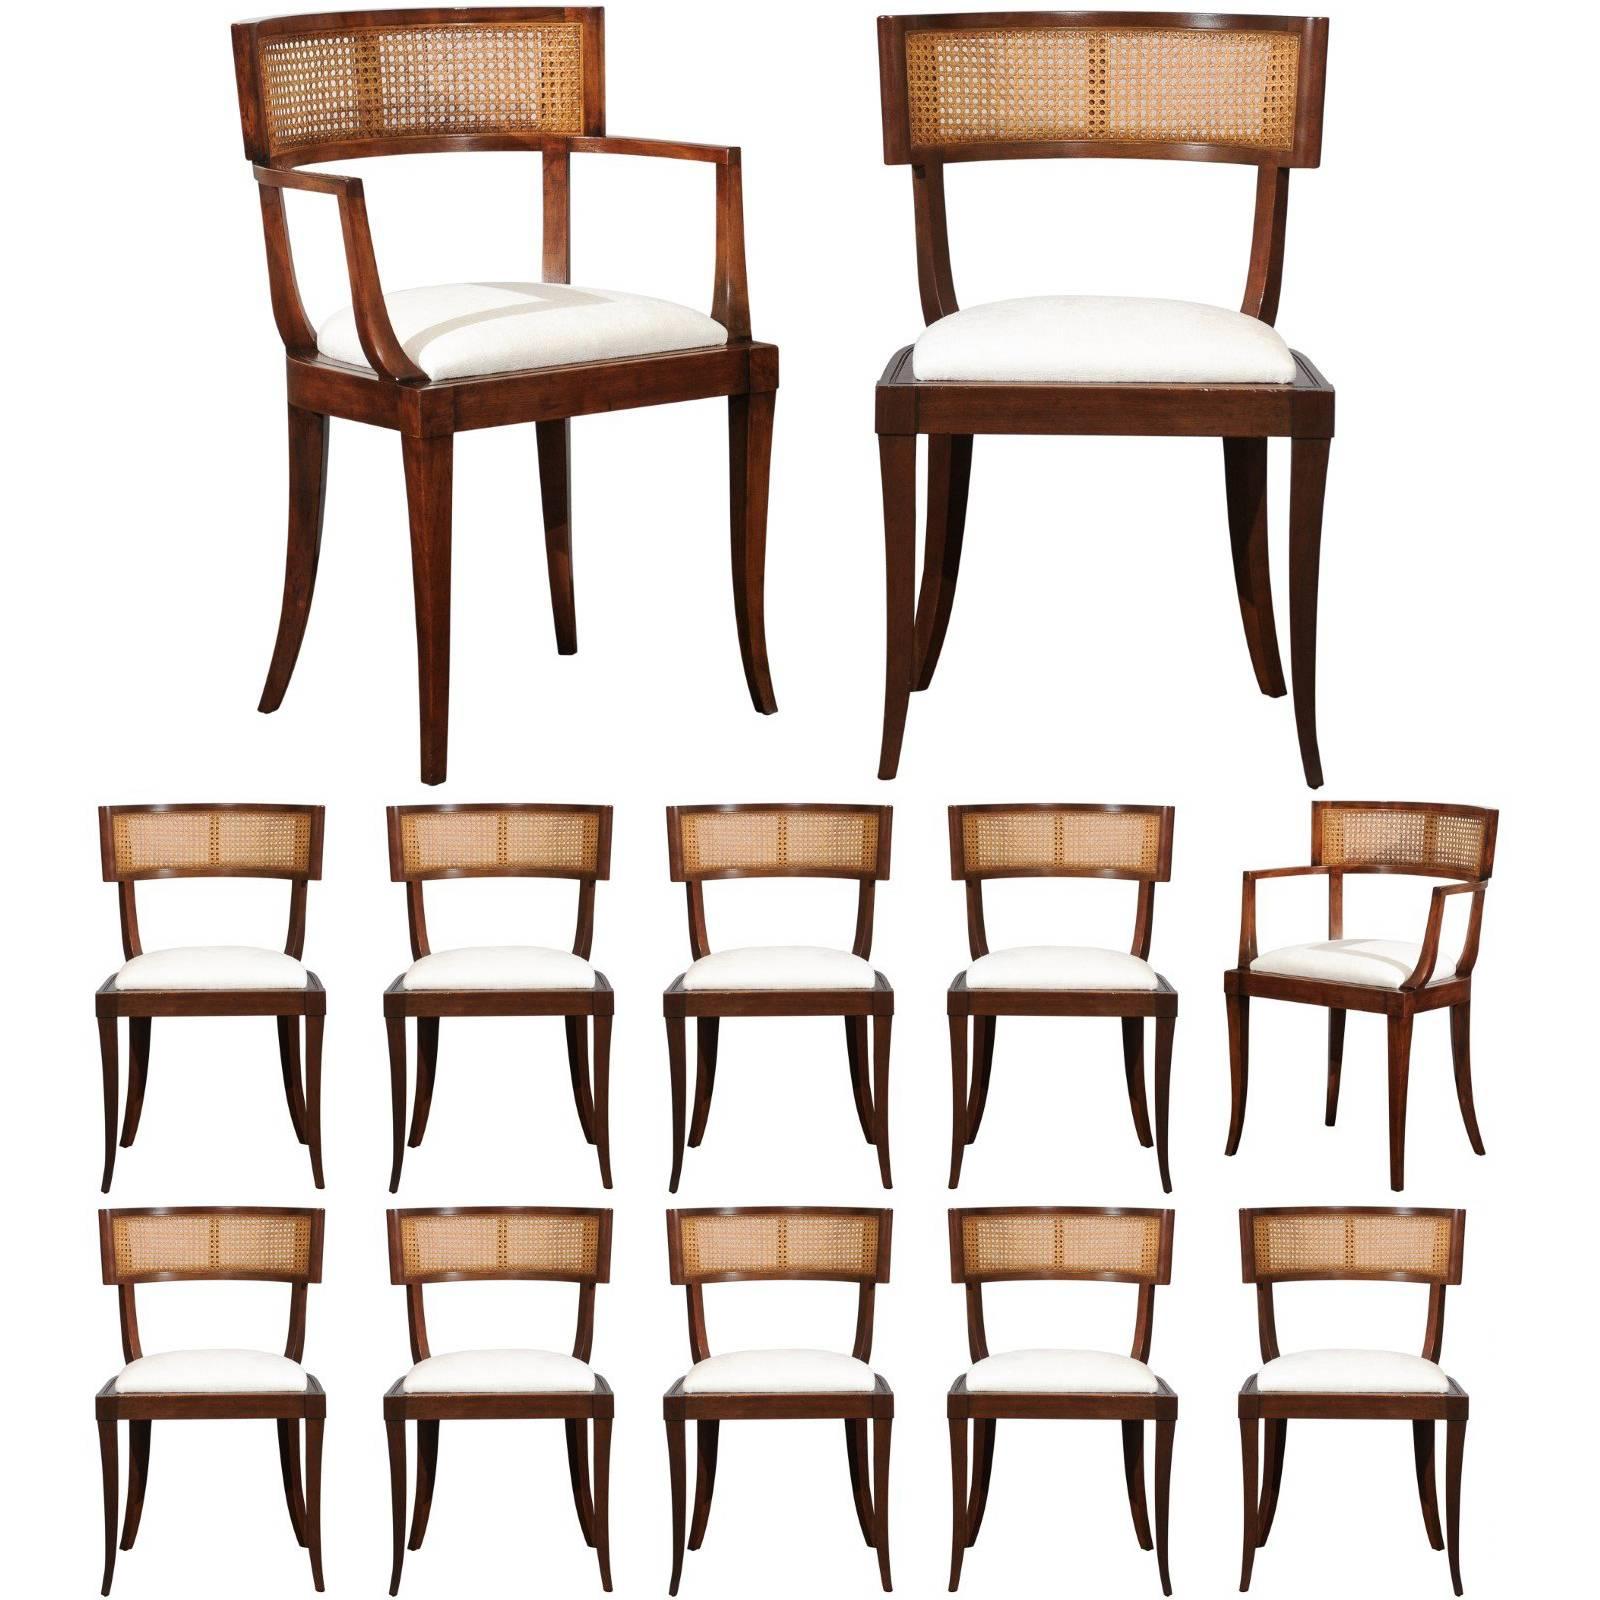 Exquisite Set of Eight Klismos Cane Dining Chairs by Baker, circa 1958